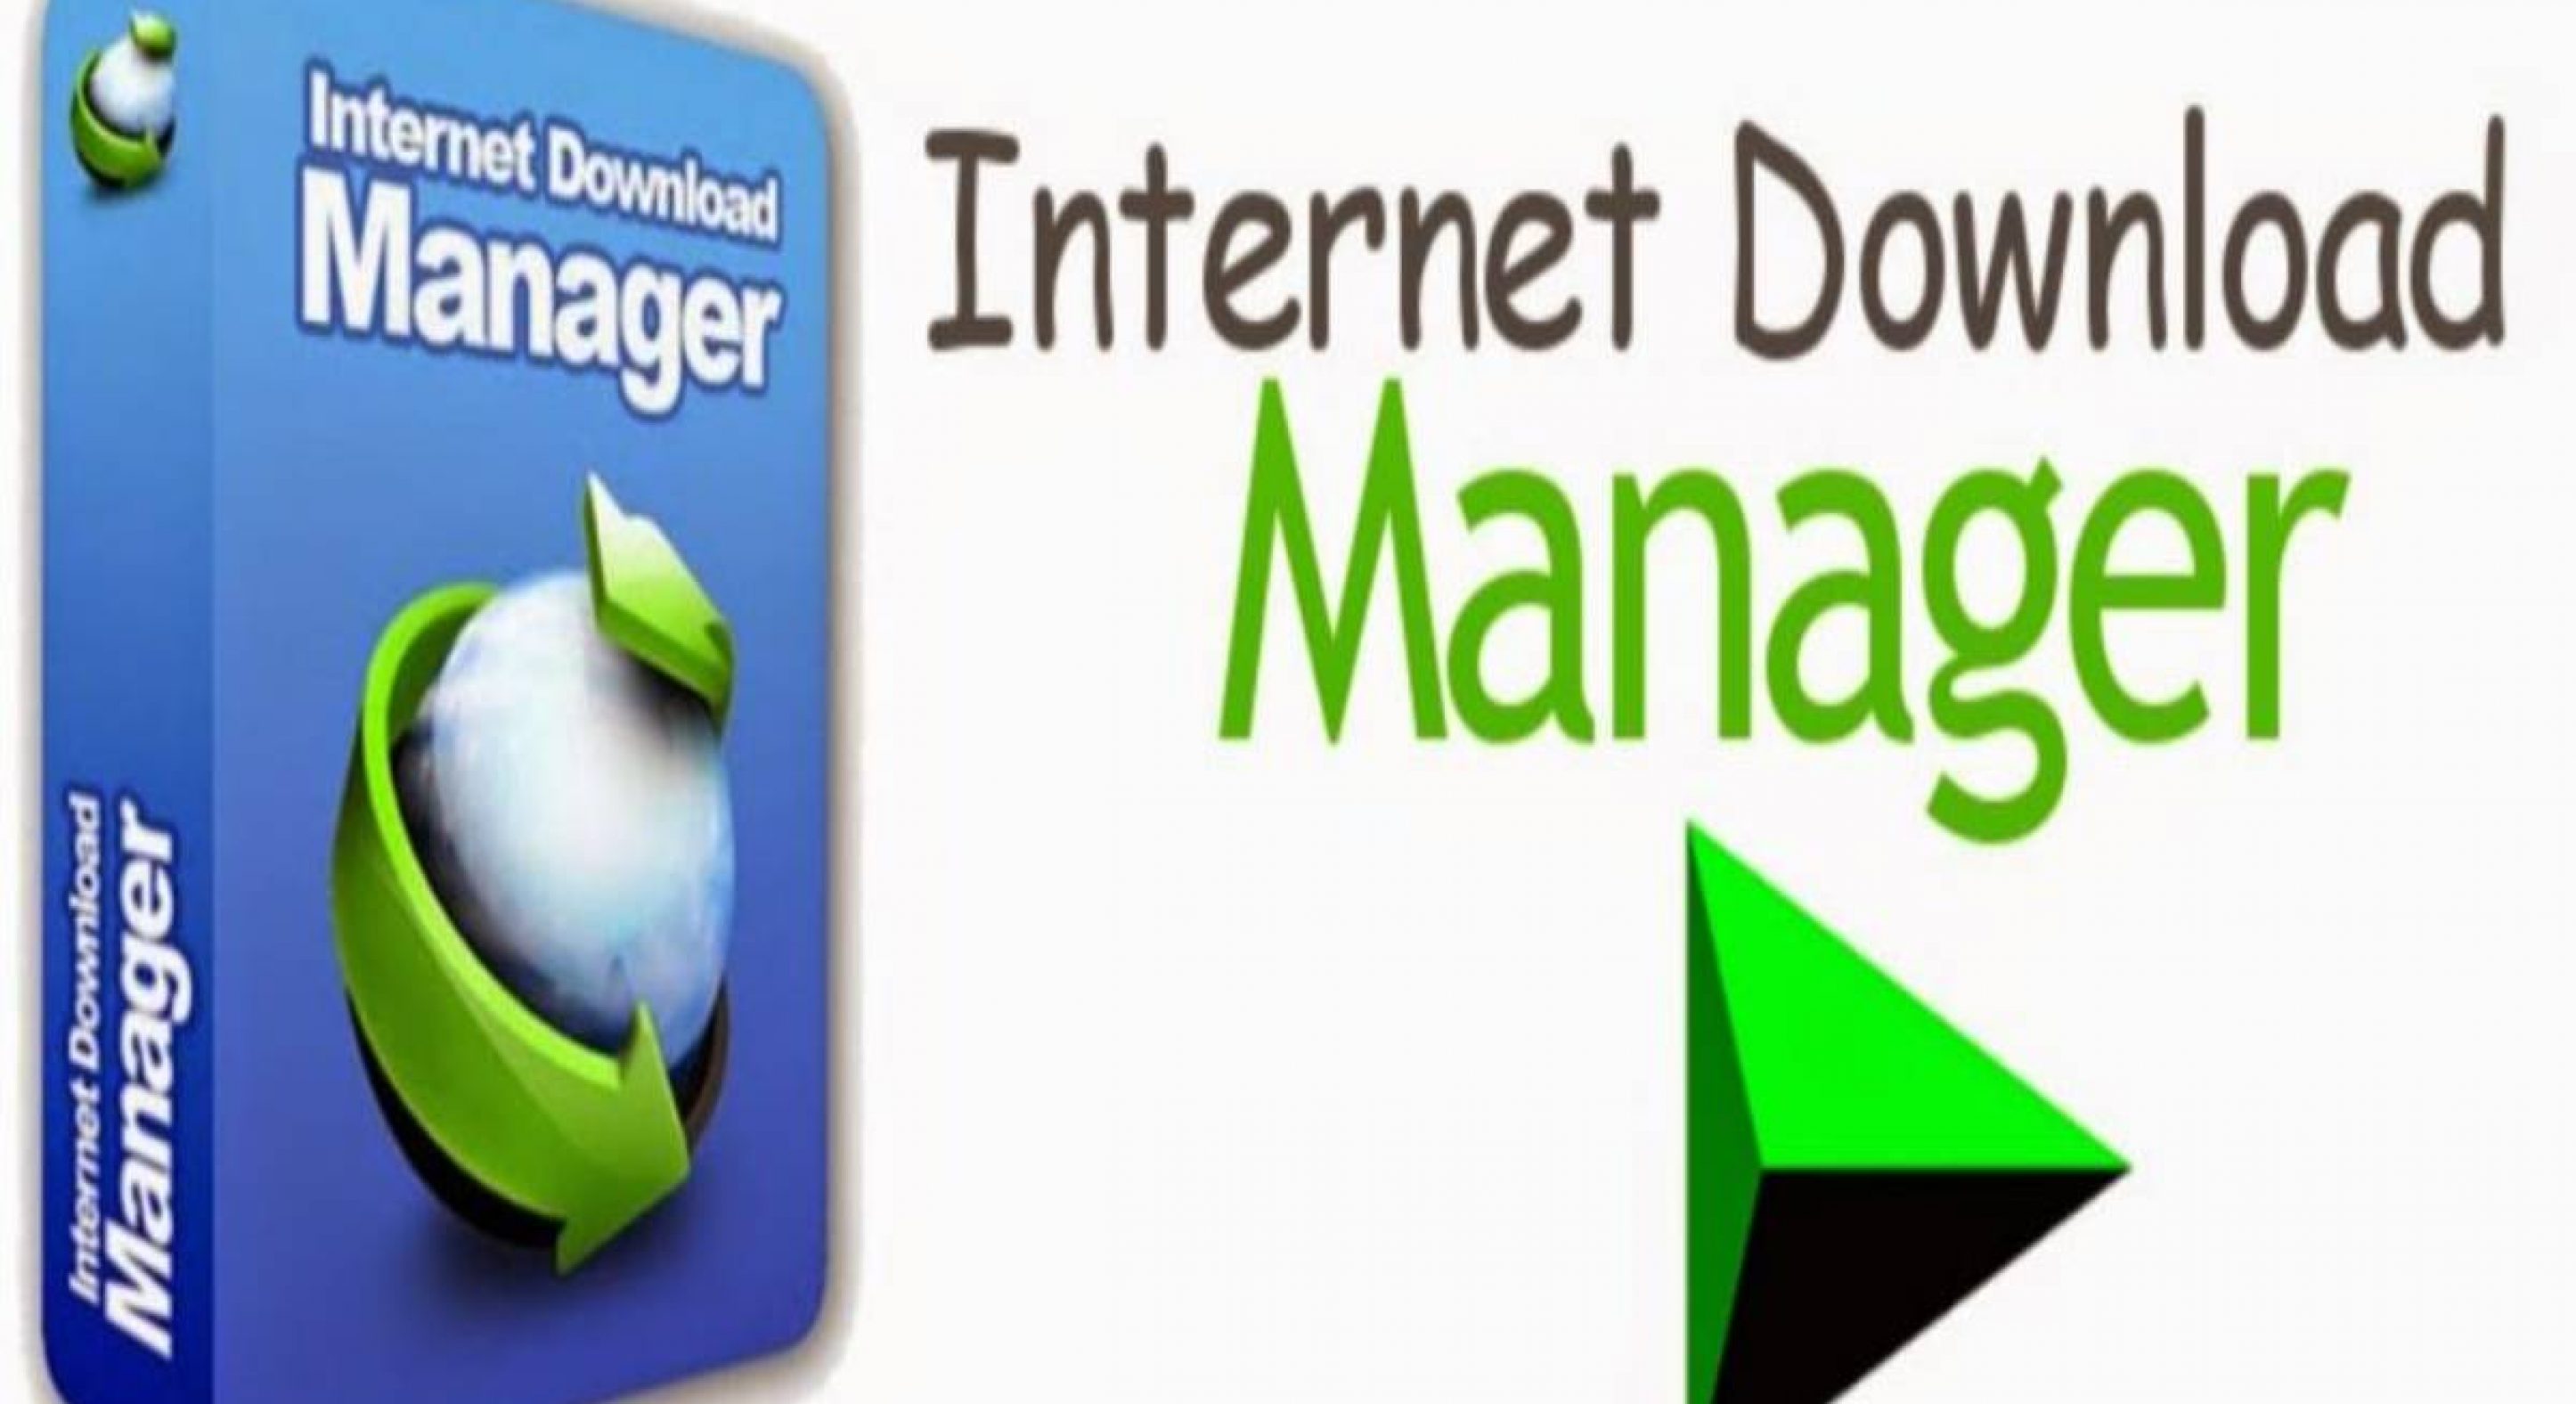 internet download manager latest version with crack filehippo